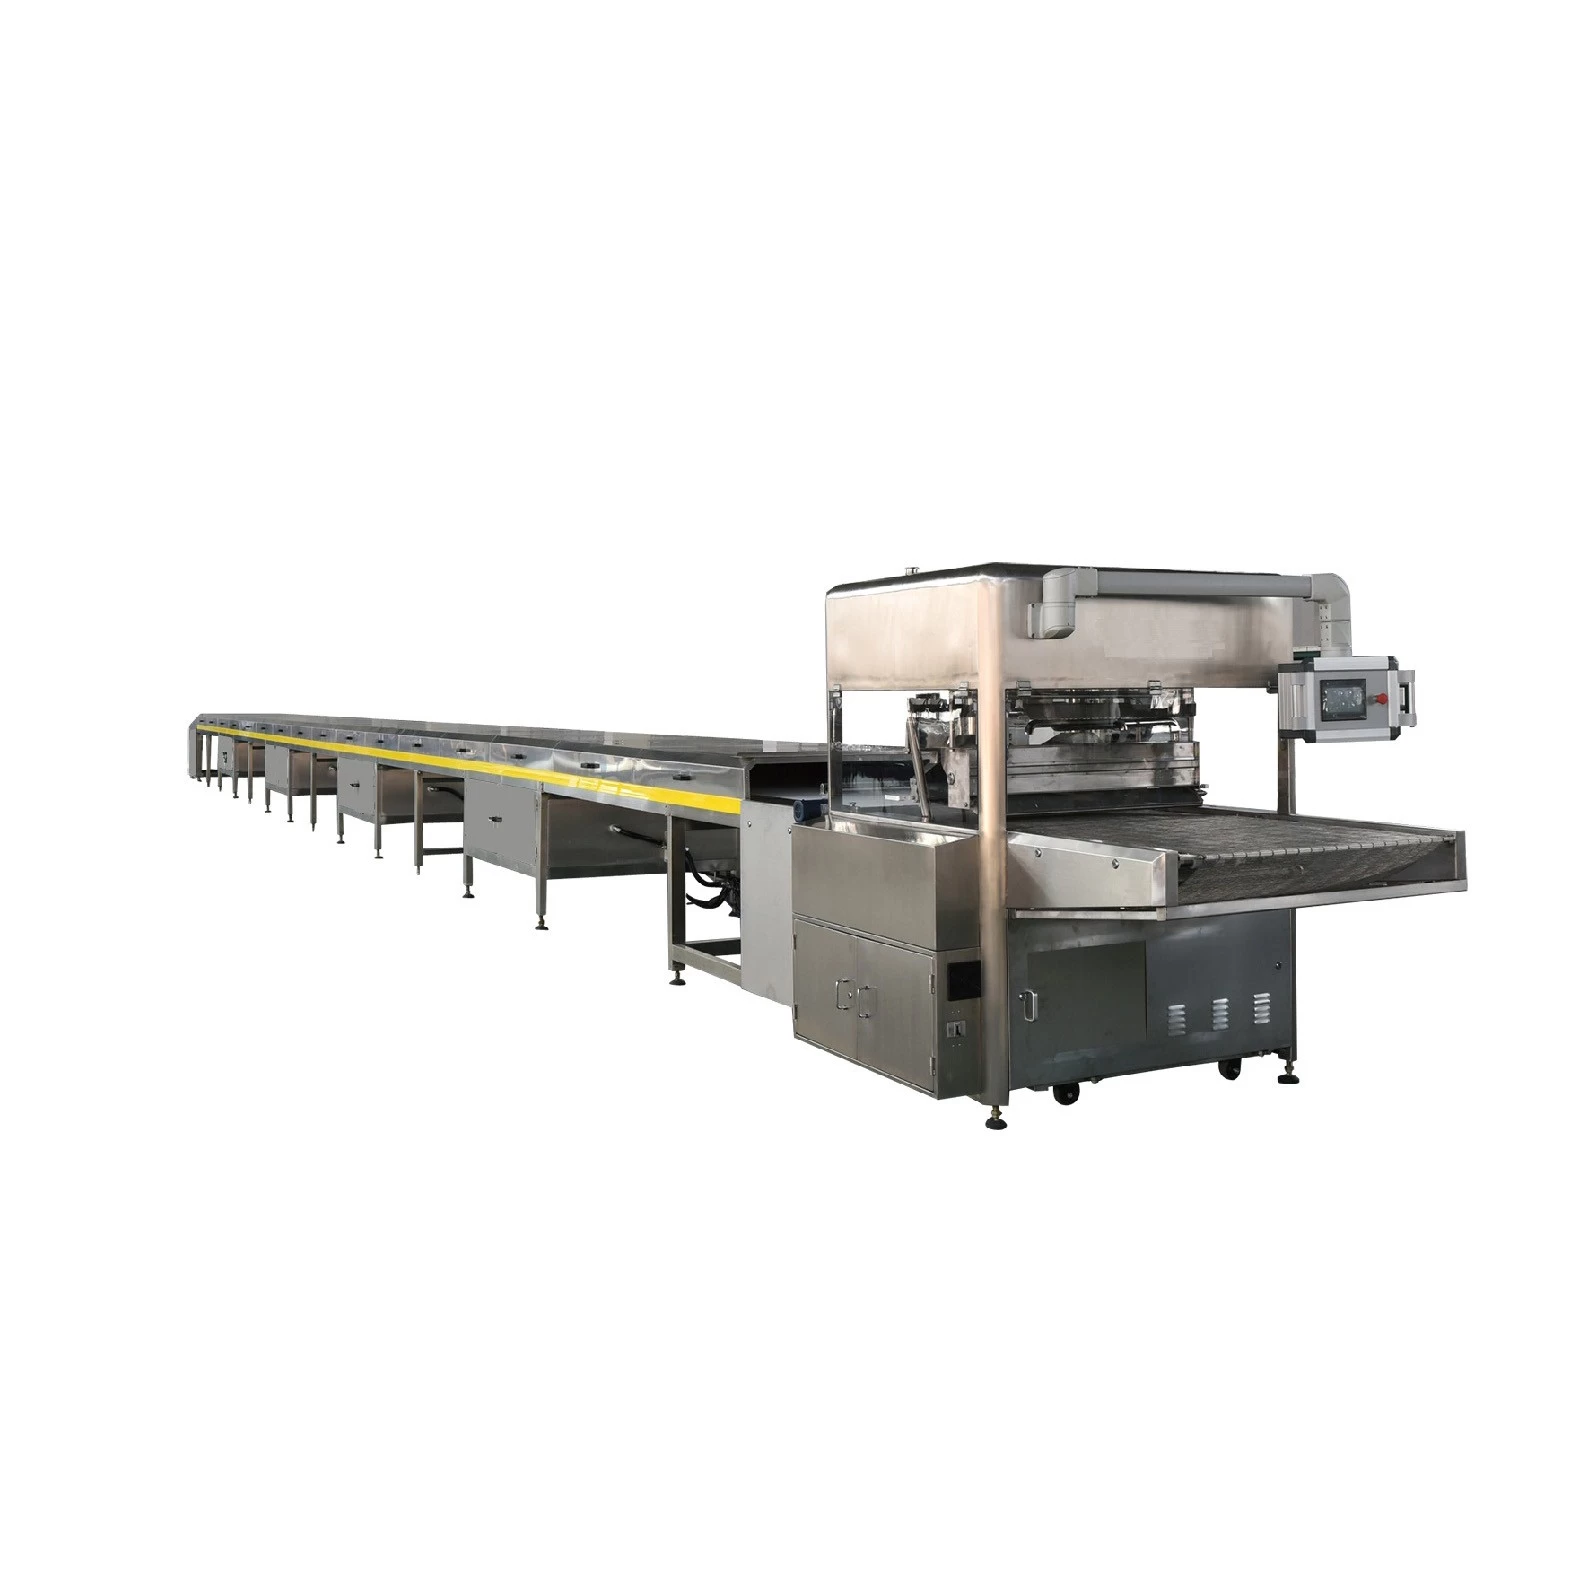 China 400 Mini Small Wafer Chocolate Enrober Chocolate Waterfall Machine for Sale manufacturer